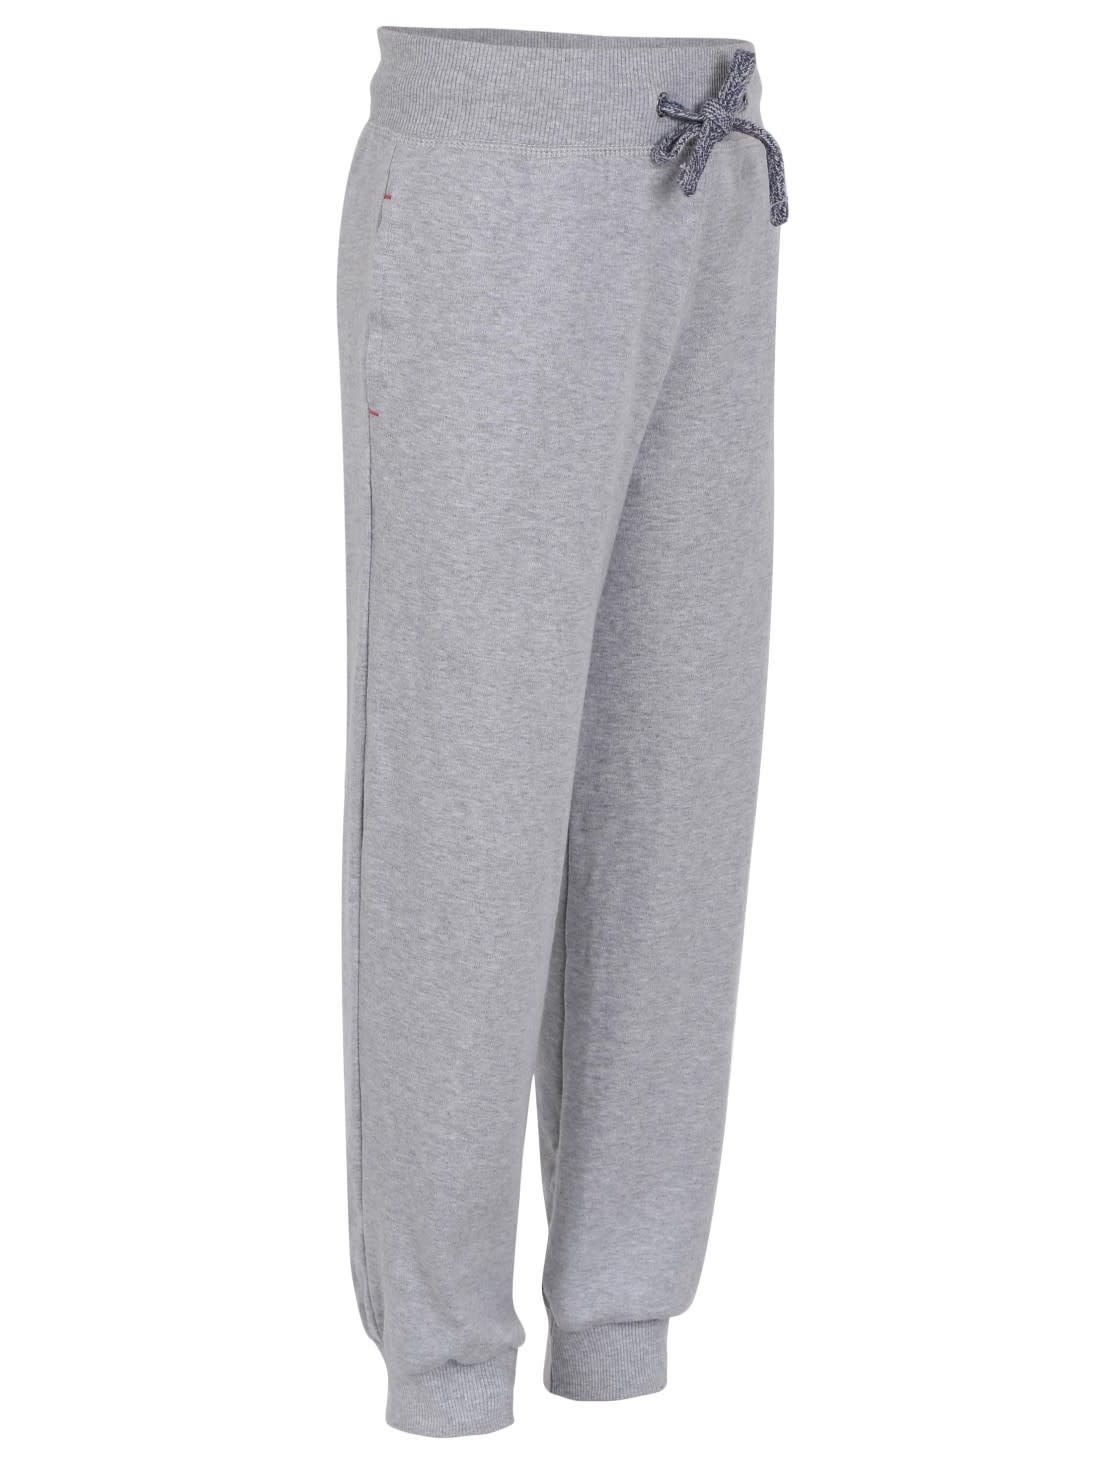 Anti-Odour Men's Slim Fit Active Sports Pants Light Grey - GLPTP01: Buy  Anti-Odour Men's Slim Fit Active Sports Pants Light Grey - GLPTP01 Online  at Best Price in India | Nykaa